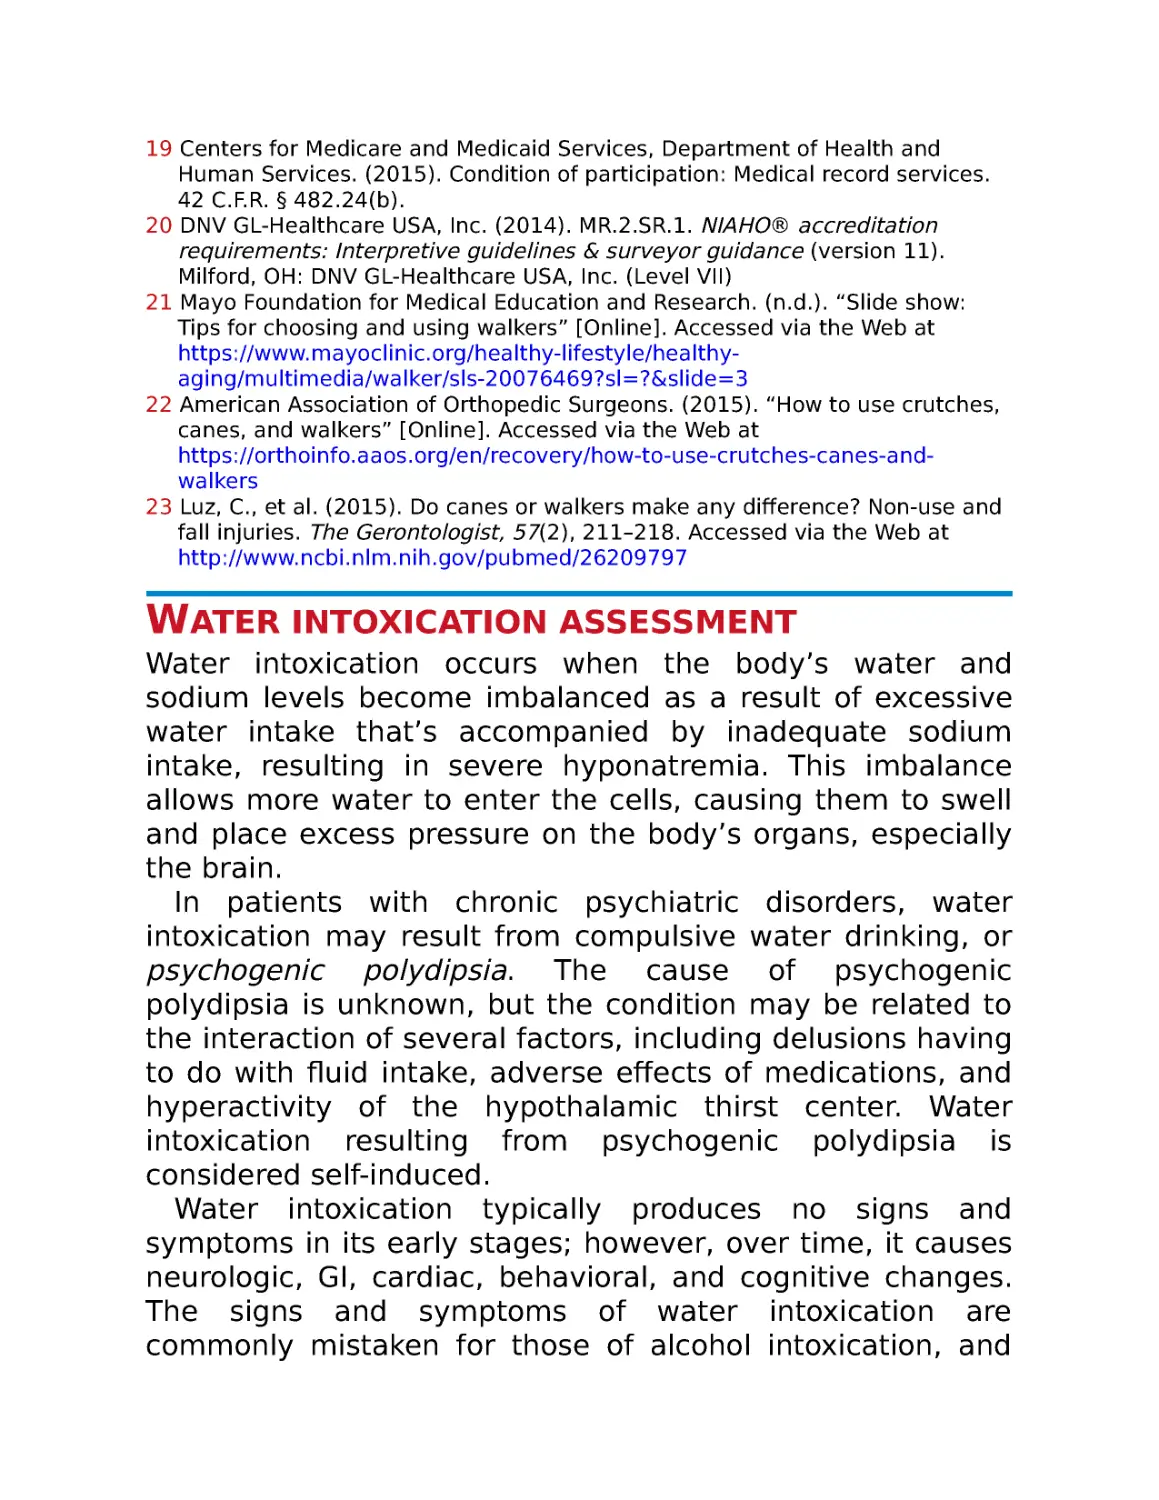 Water intoxication assessment